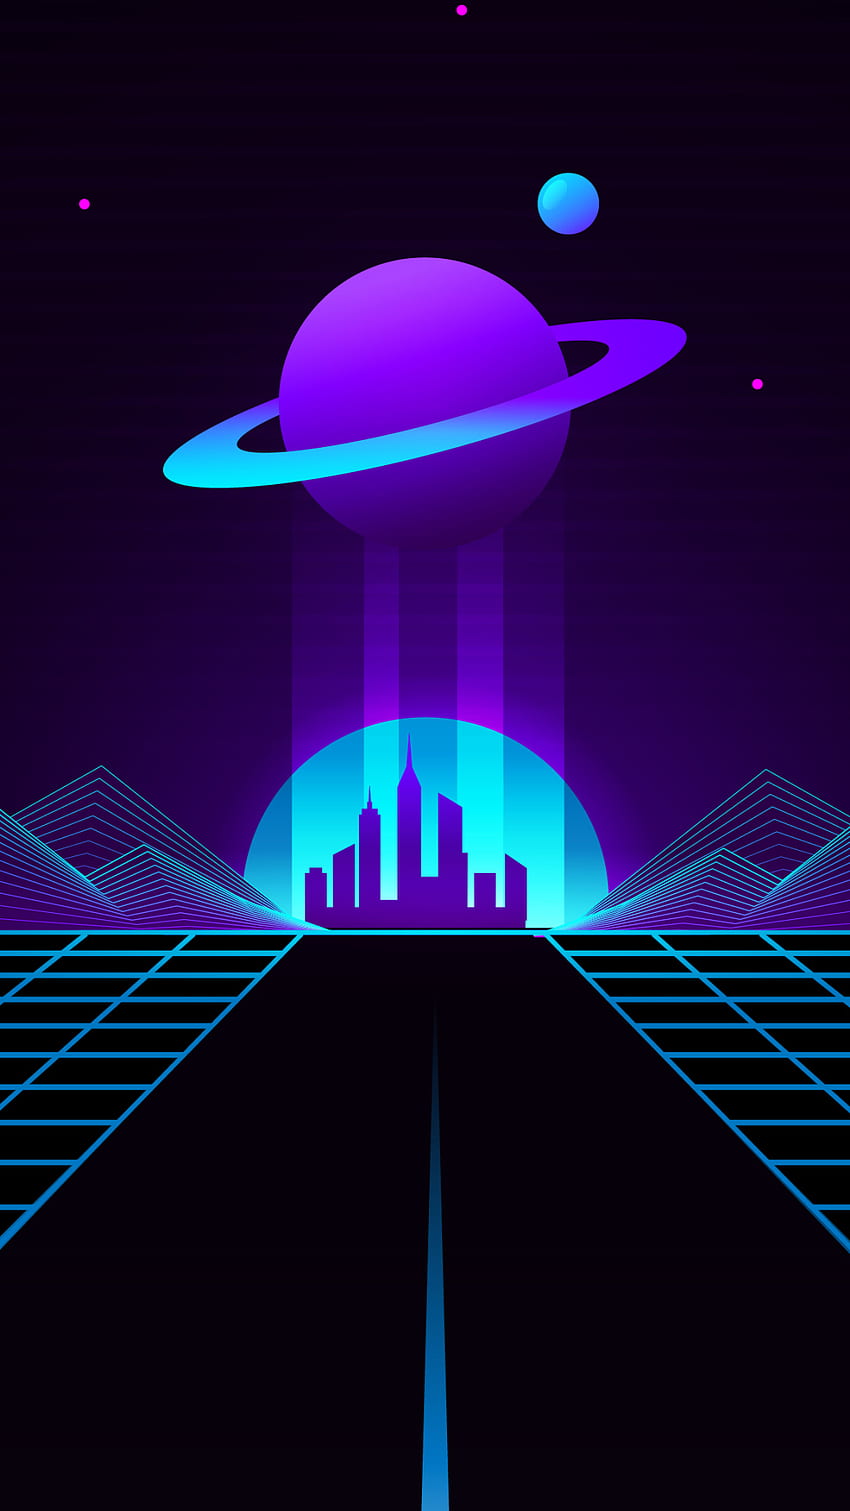 Synthwave Planet Retro Wave iPhone 7、6s、6 Plus、Pixel XL、One Plus 3、3t、5、Artist、および Background、1080X1920 Wave HD電話の壁紙